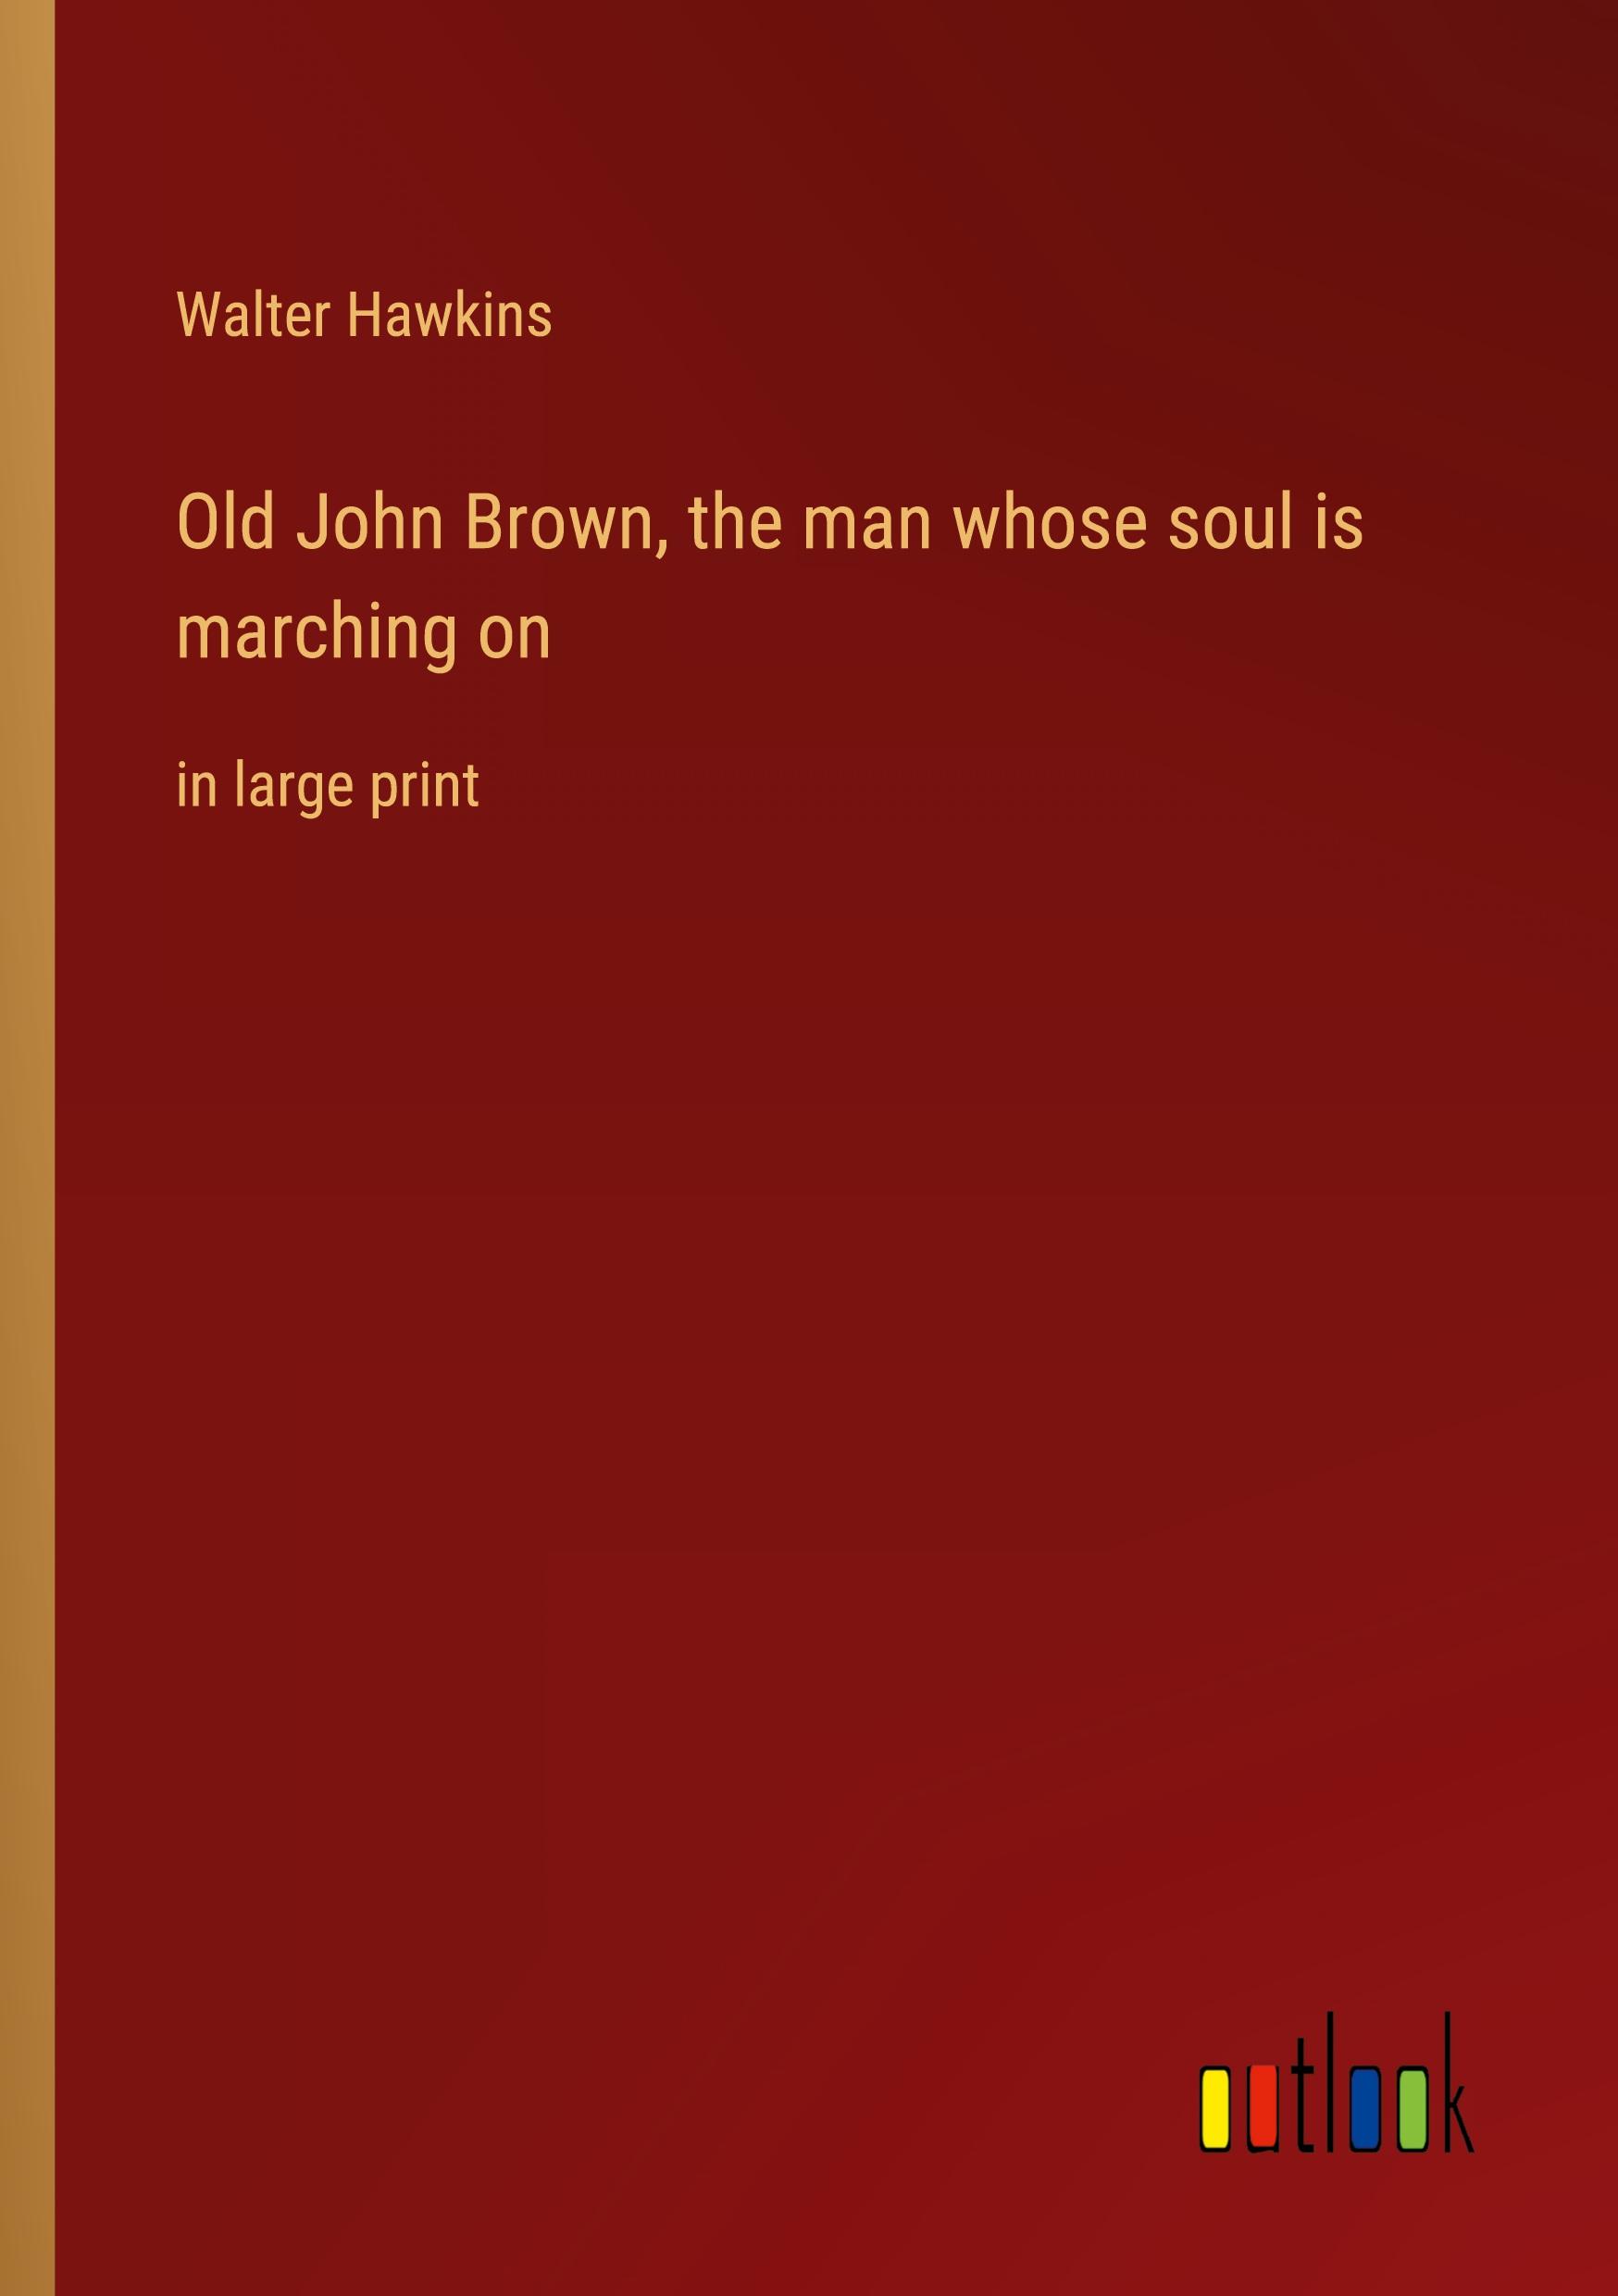 Old John Brown, the man whose soul is marching on